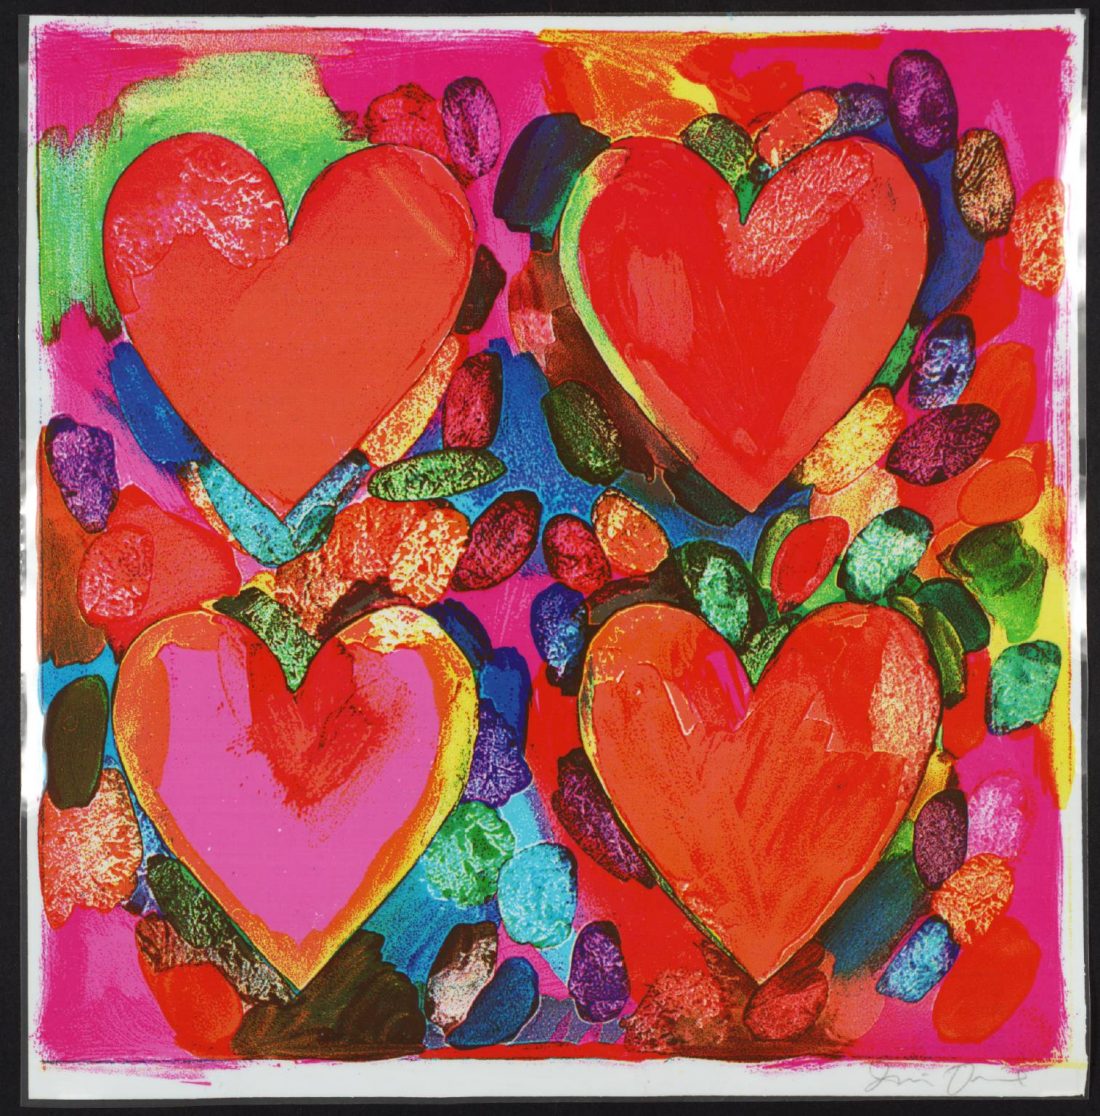 "Four Hearts" by Jim Dine (Source: Tate)